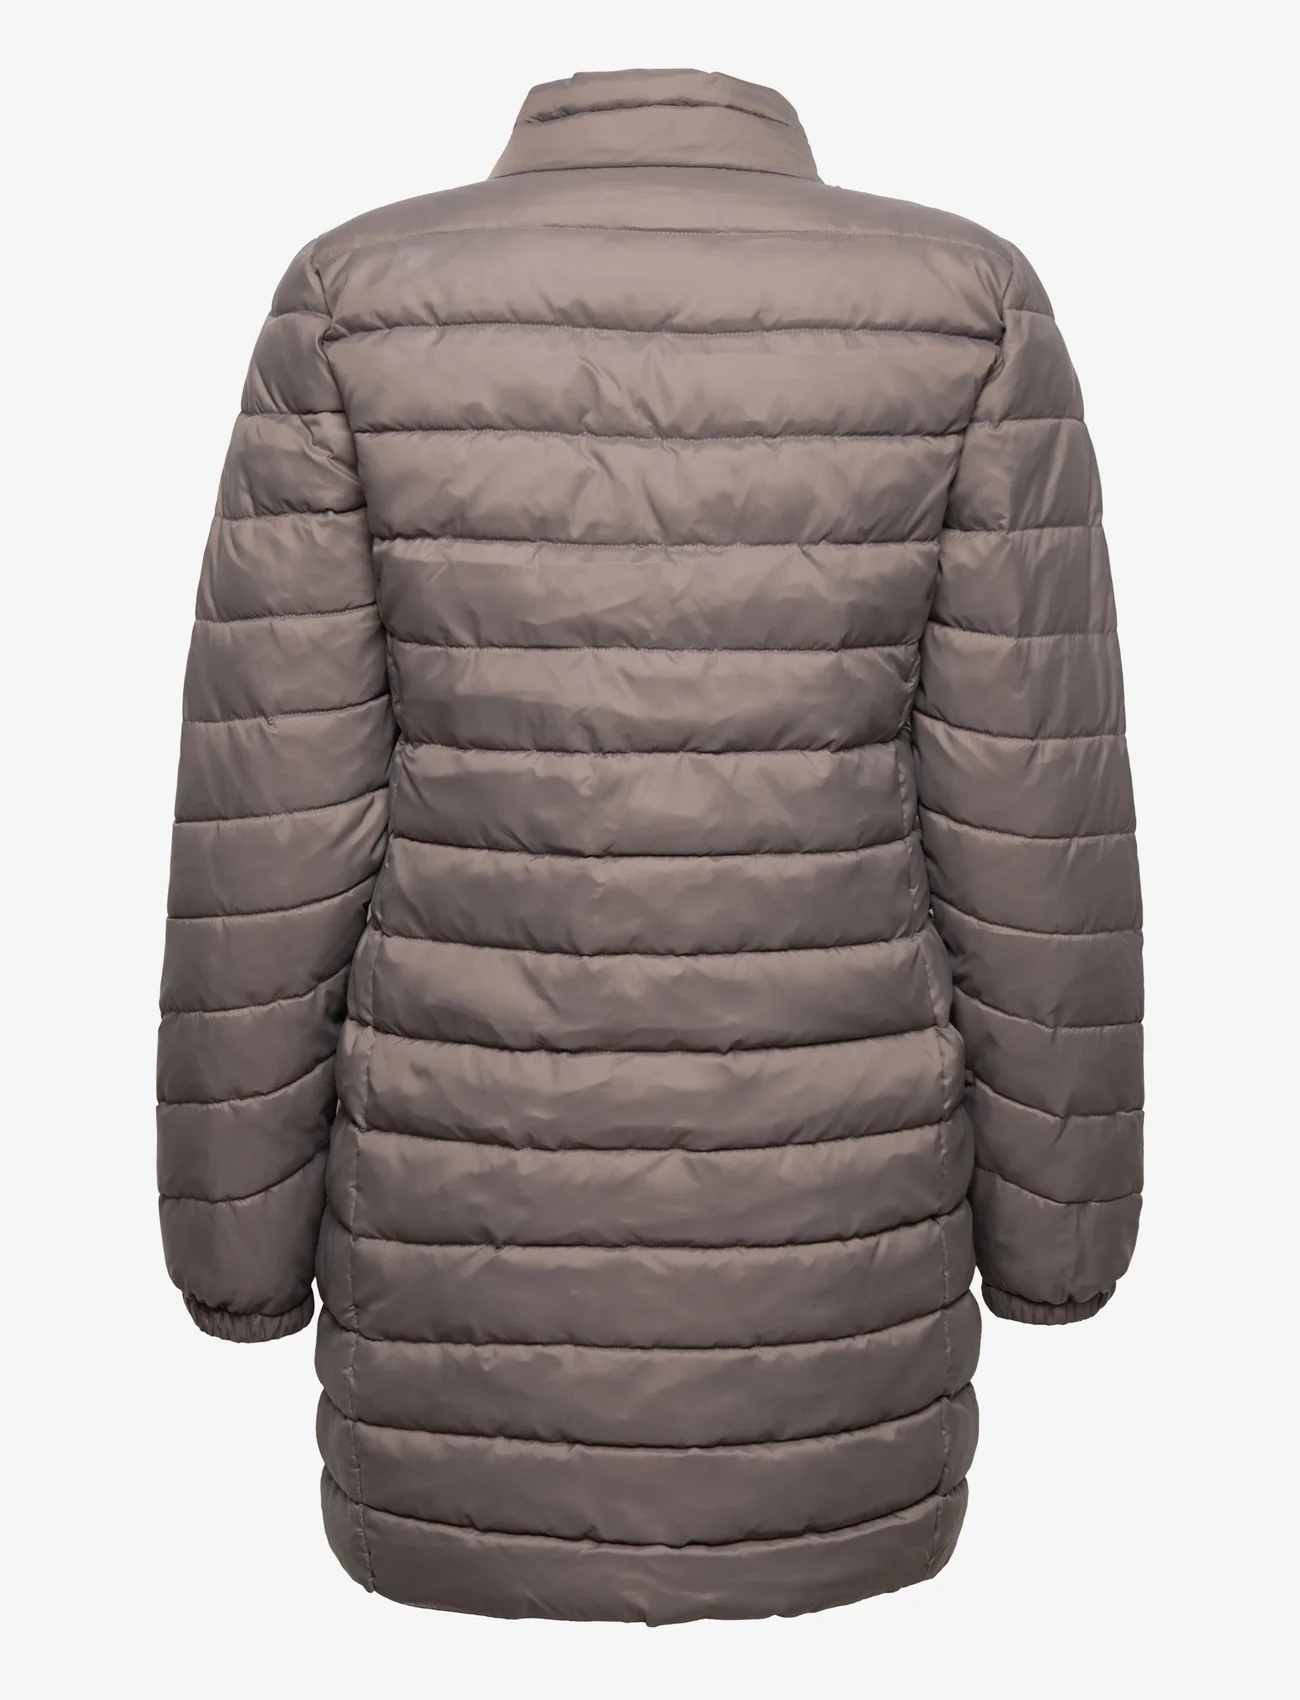 ONLY - ONLNINA QUILTED COAT OTW - talvejoped - falcon - 1